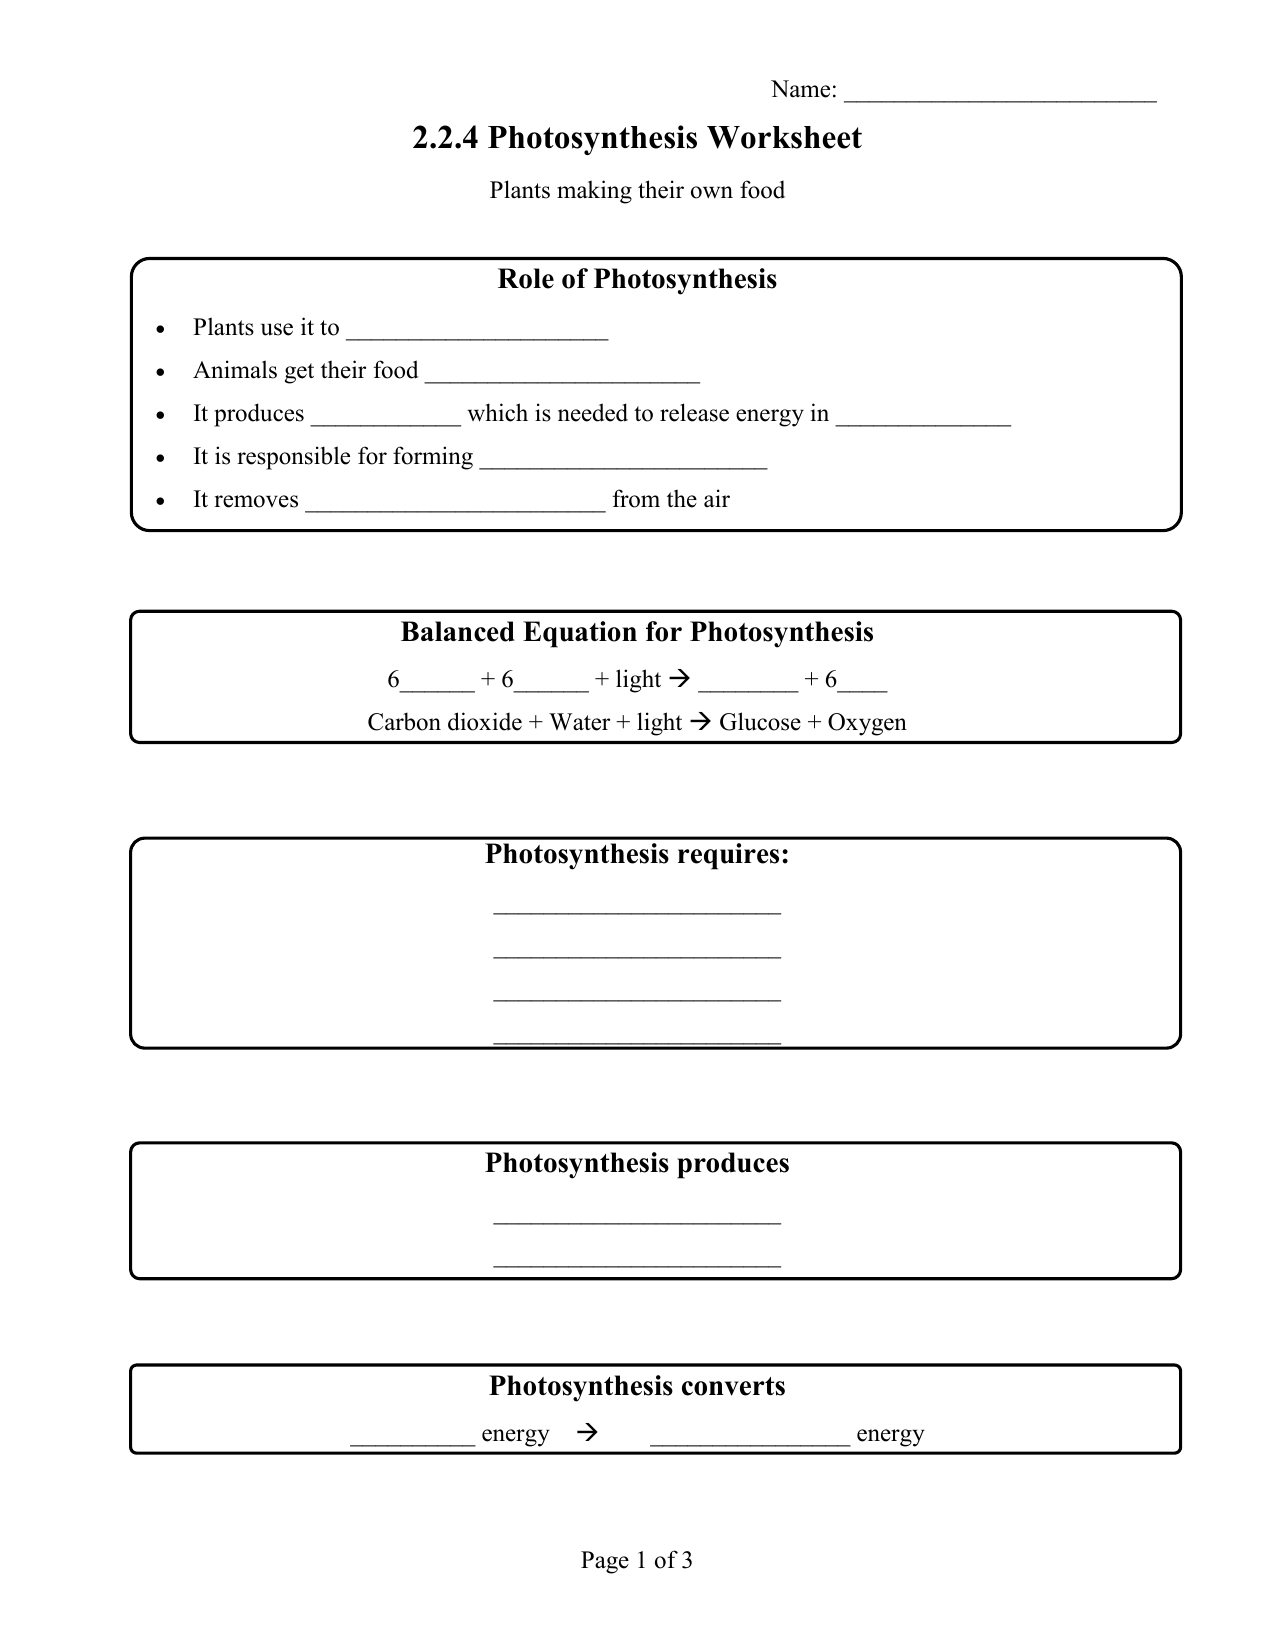 22424.22424.24 Photosynthesis Worksheet (24) For Photosynthesis Worksheet Answer Key